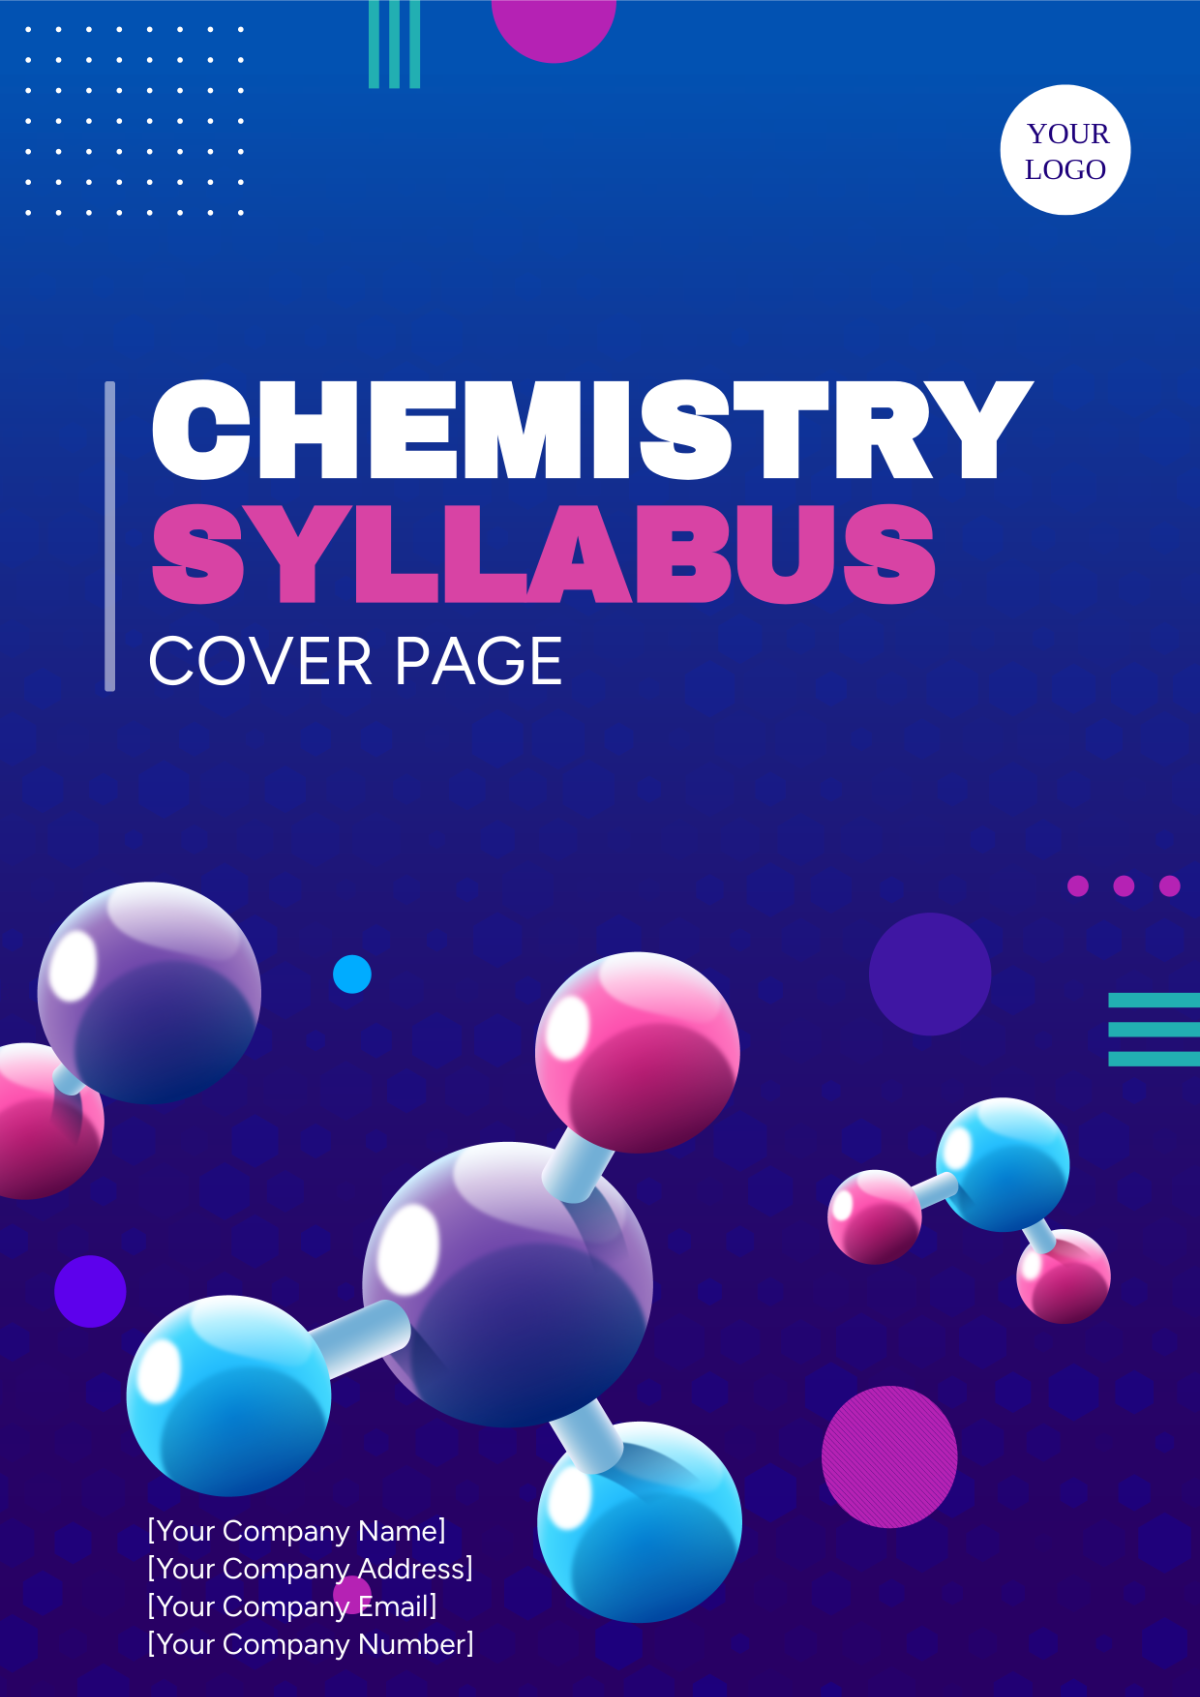 Chemistry Syllabus Cover Page